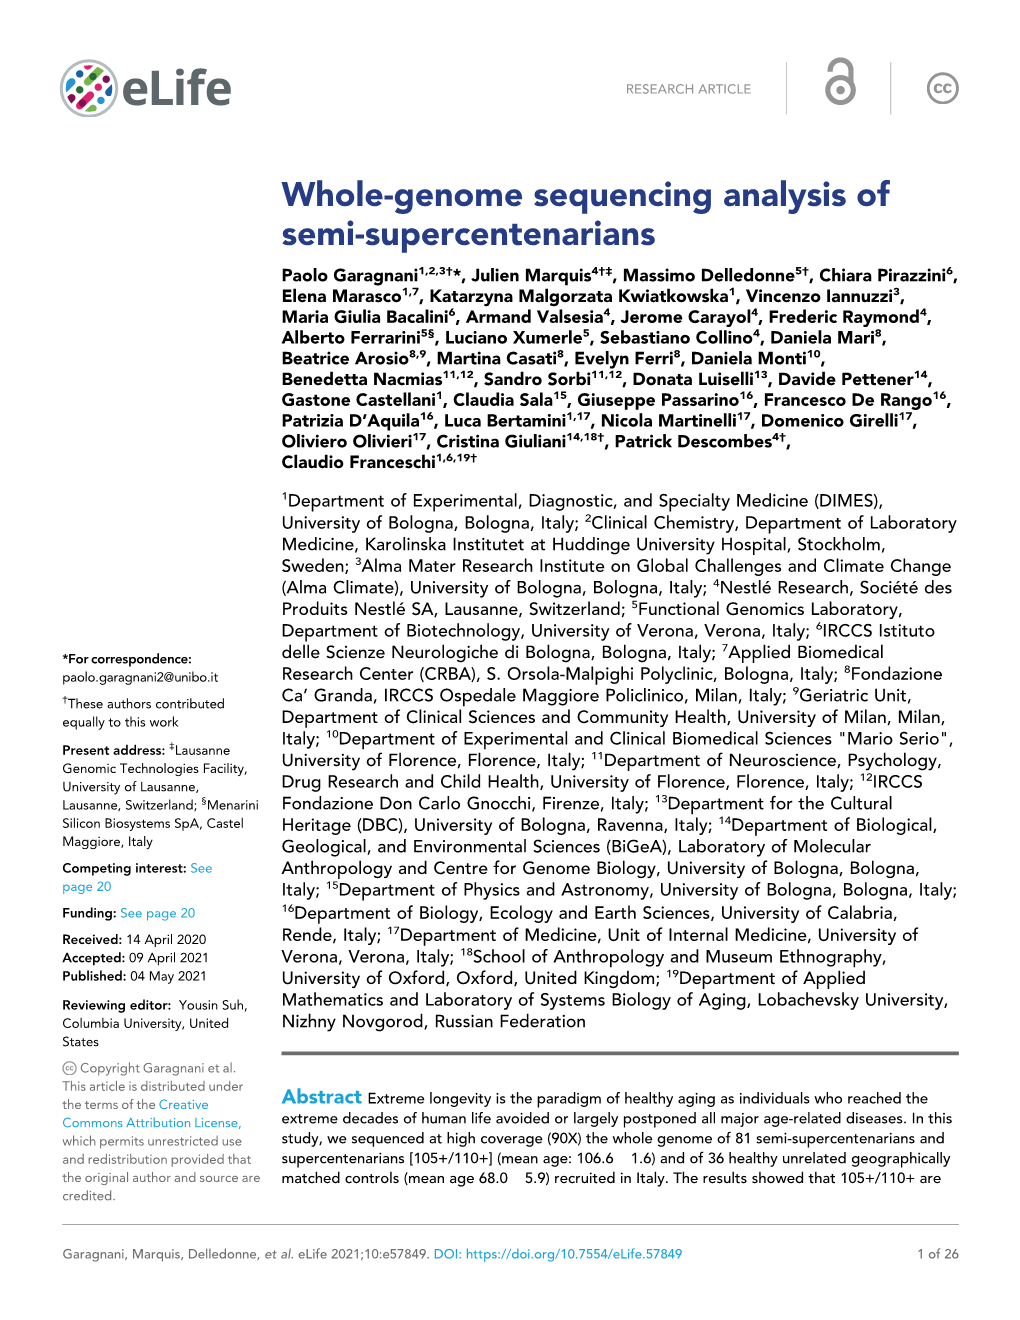 Whole-Genome Sequencing Analysis of Semi-Supercentenarians